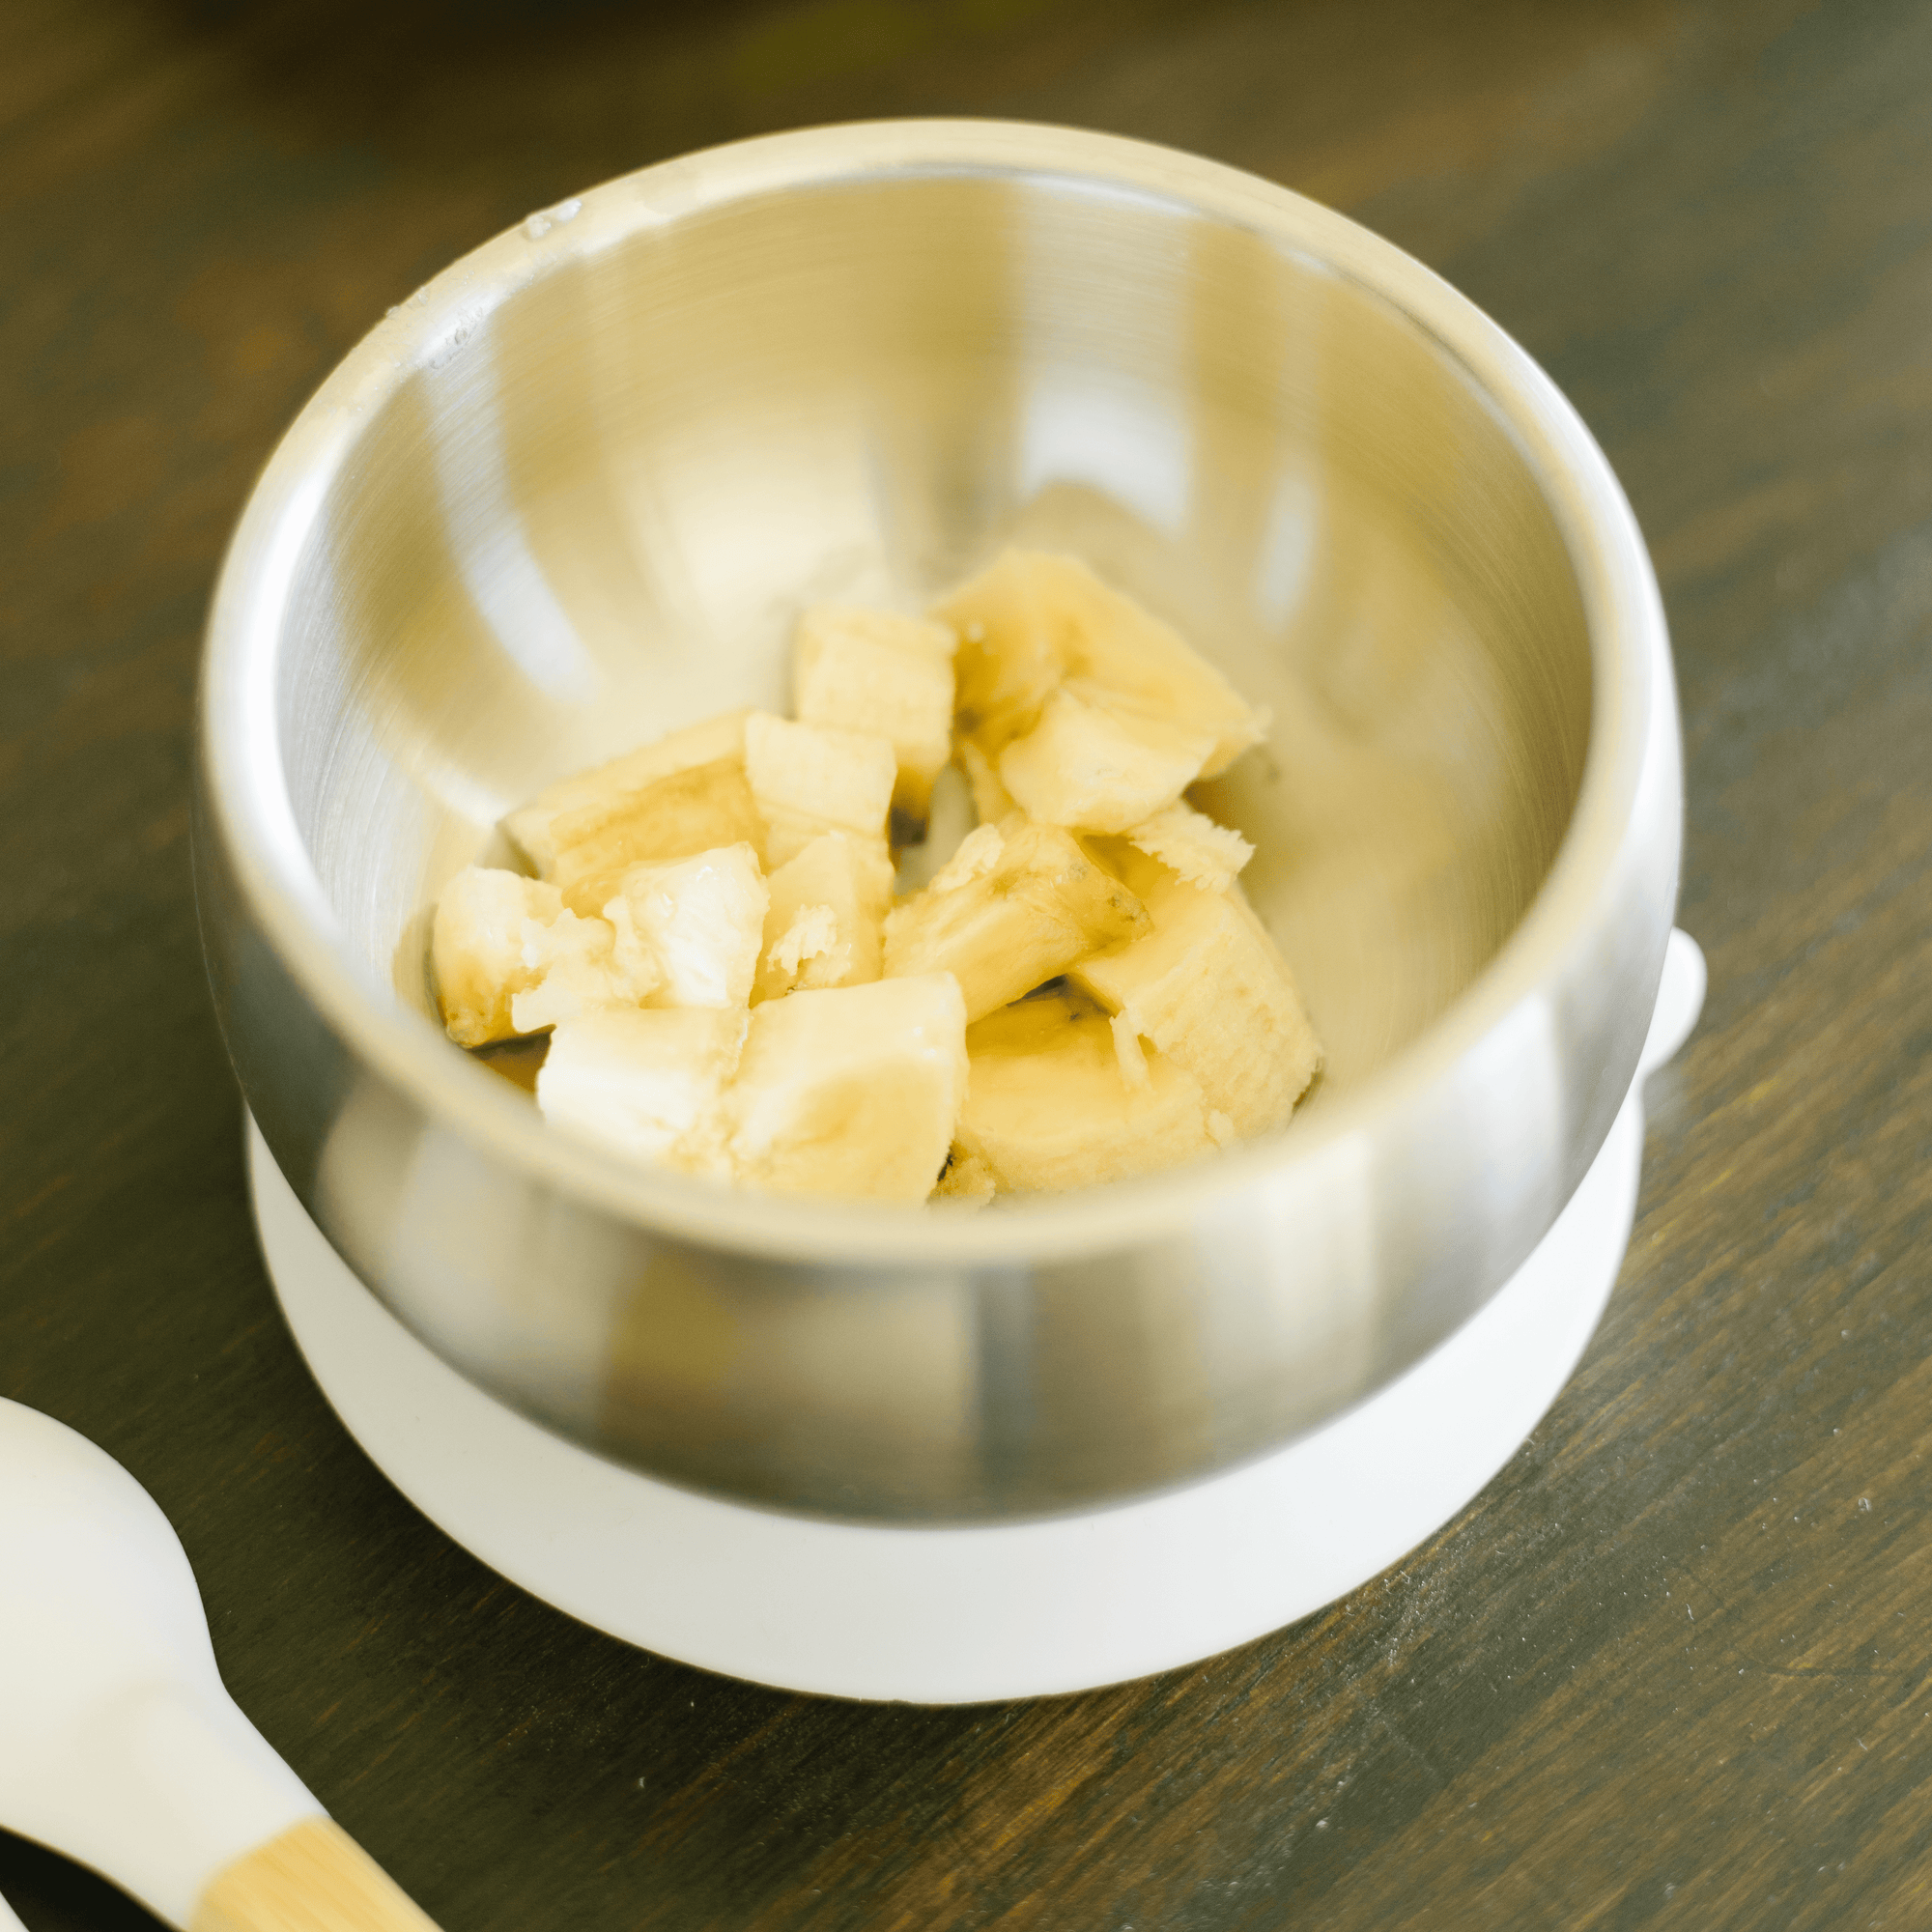 Top Reasons Avanchy's Stainless Steel Bowl is Best for Babies